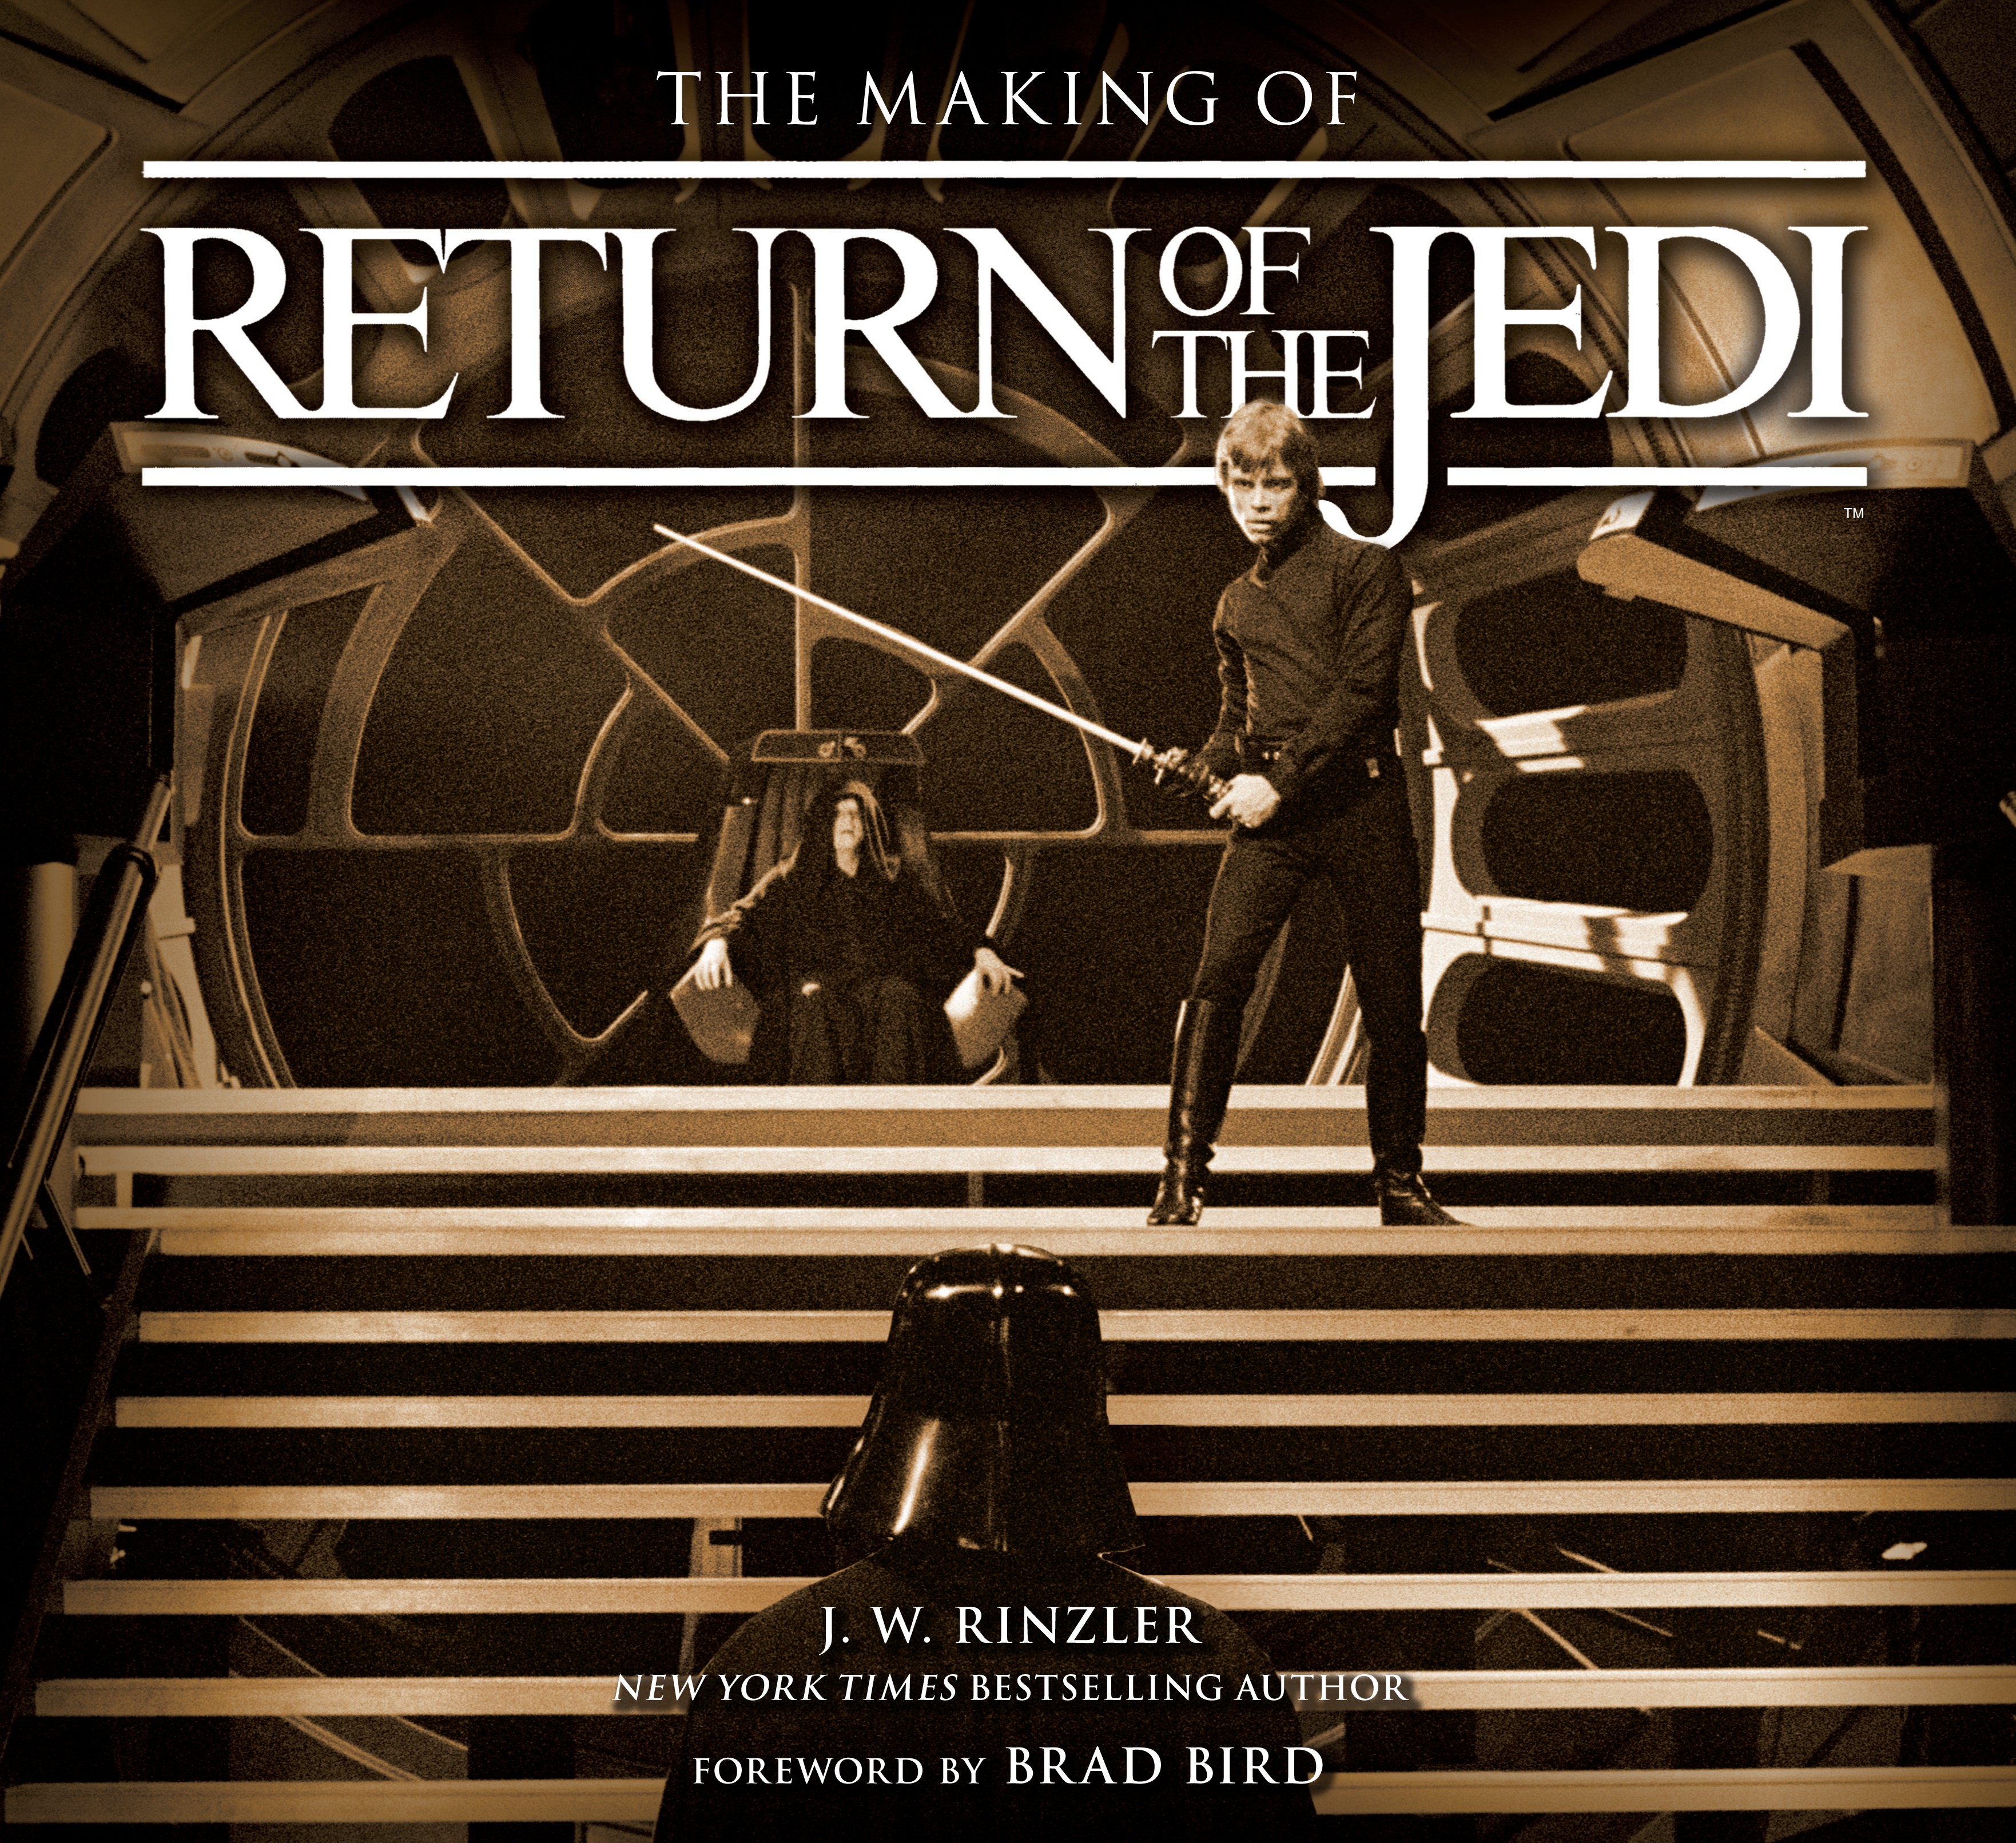 The Making Of Return Of The Jedi Ebook